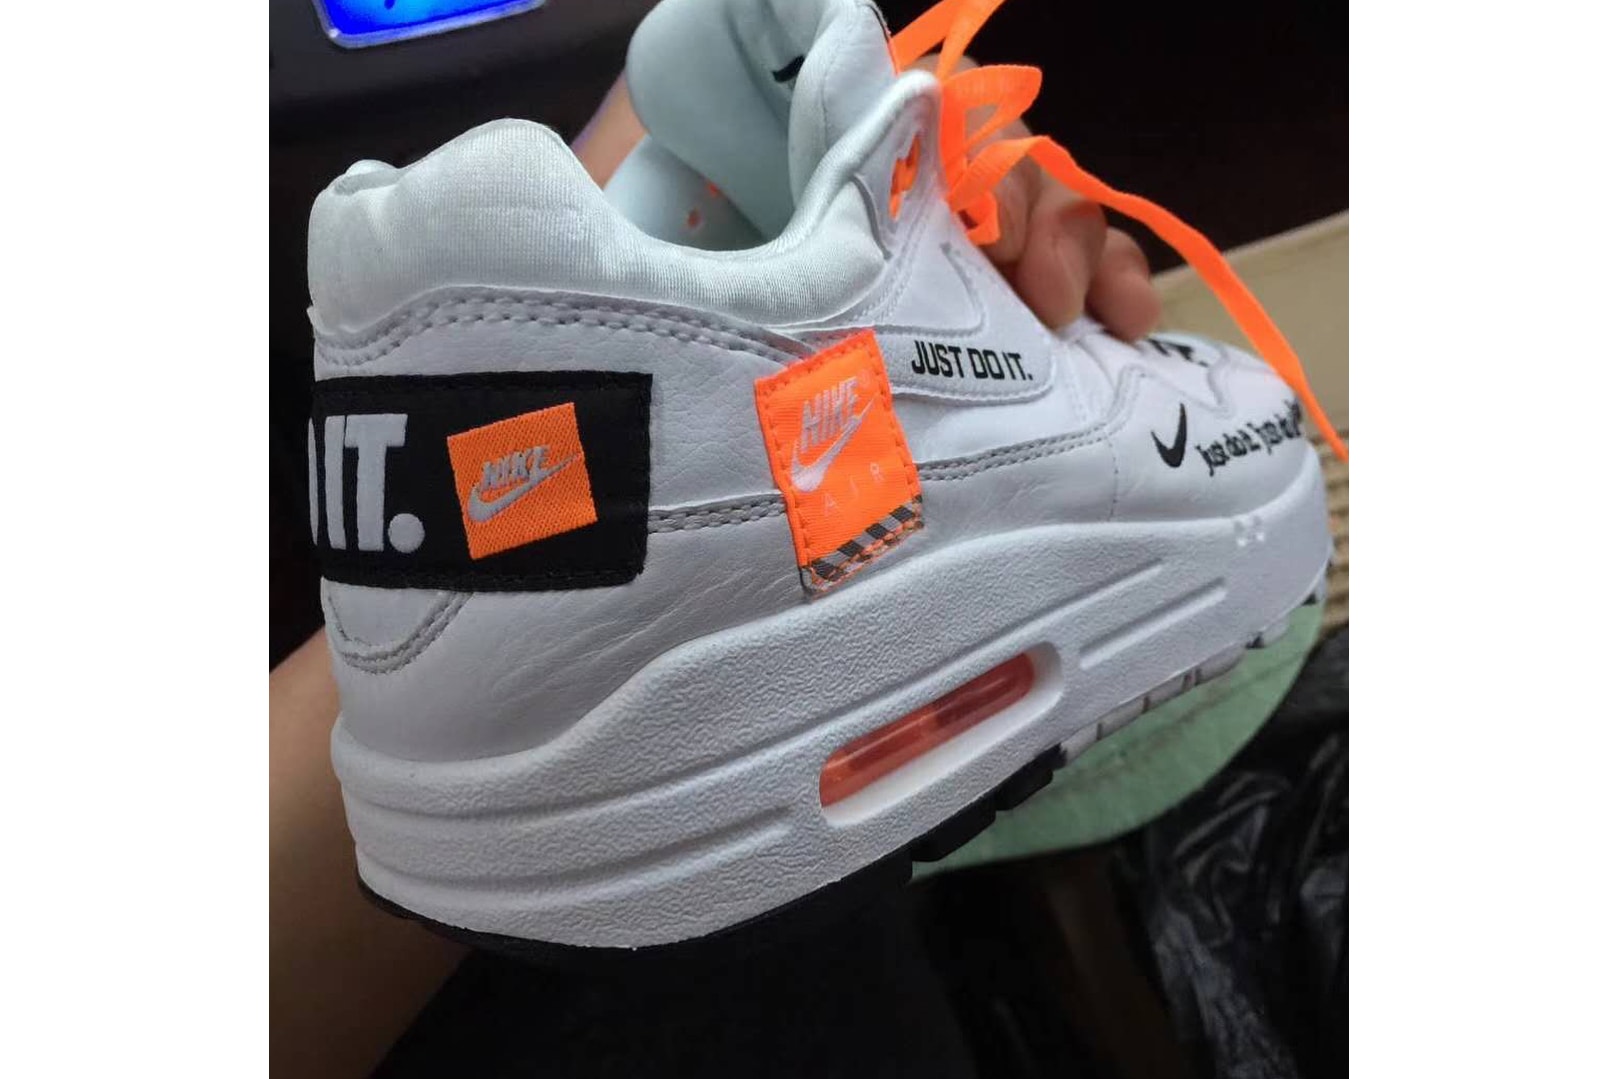 Nike Air Max 1 "Just Do It" 2018 collection First Look leak women's men's sneaker